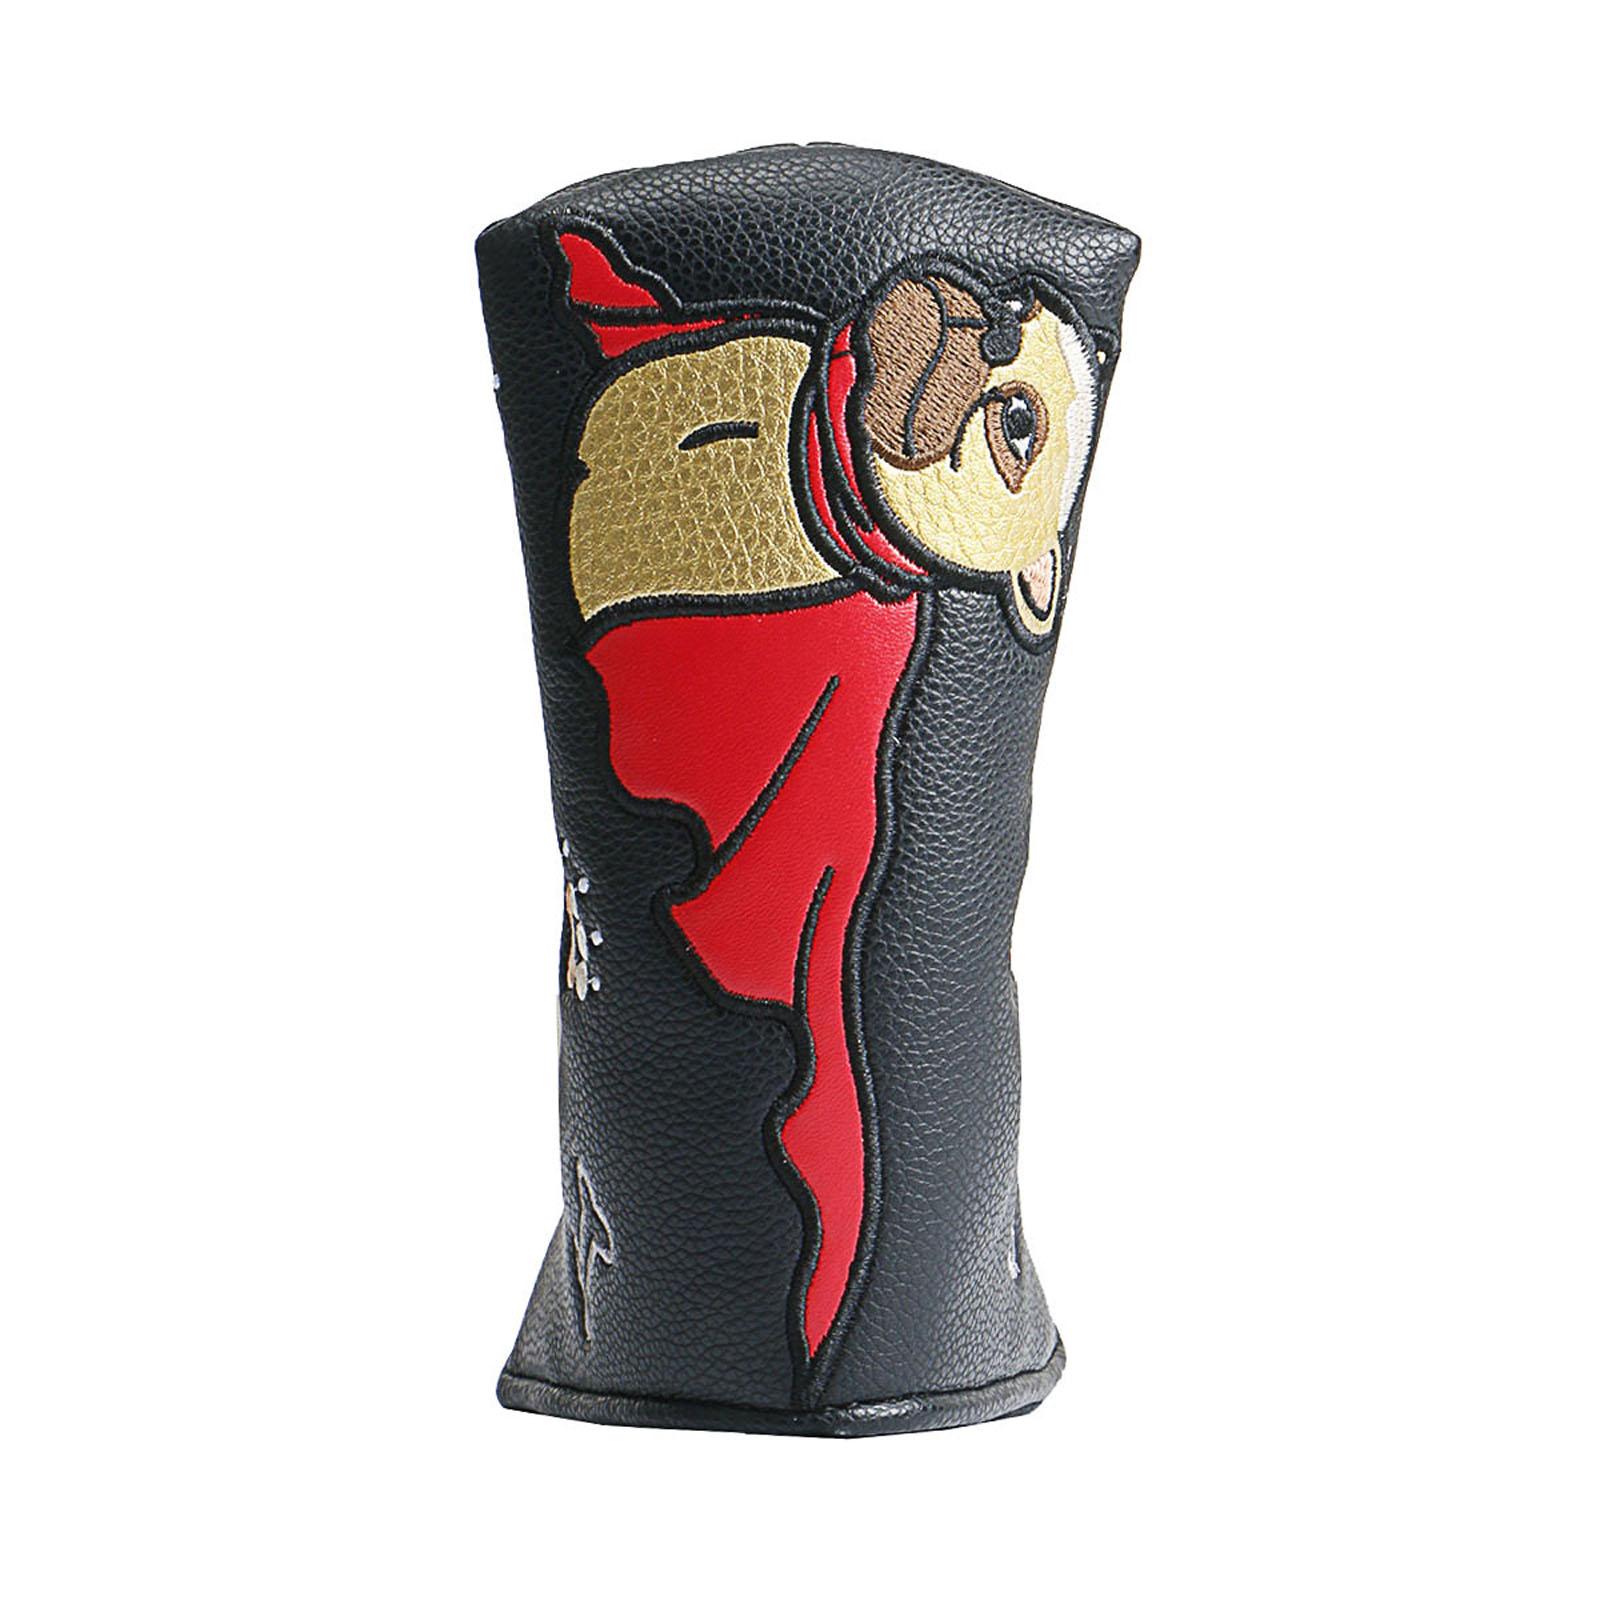 Golf Mallet Putter Head Cover Golf Supplies Fashion Protective Putter Covers Straight Black